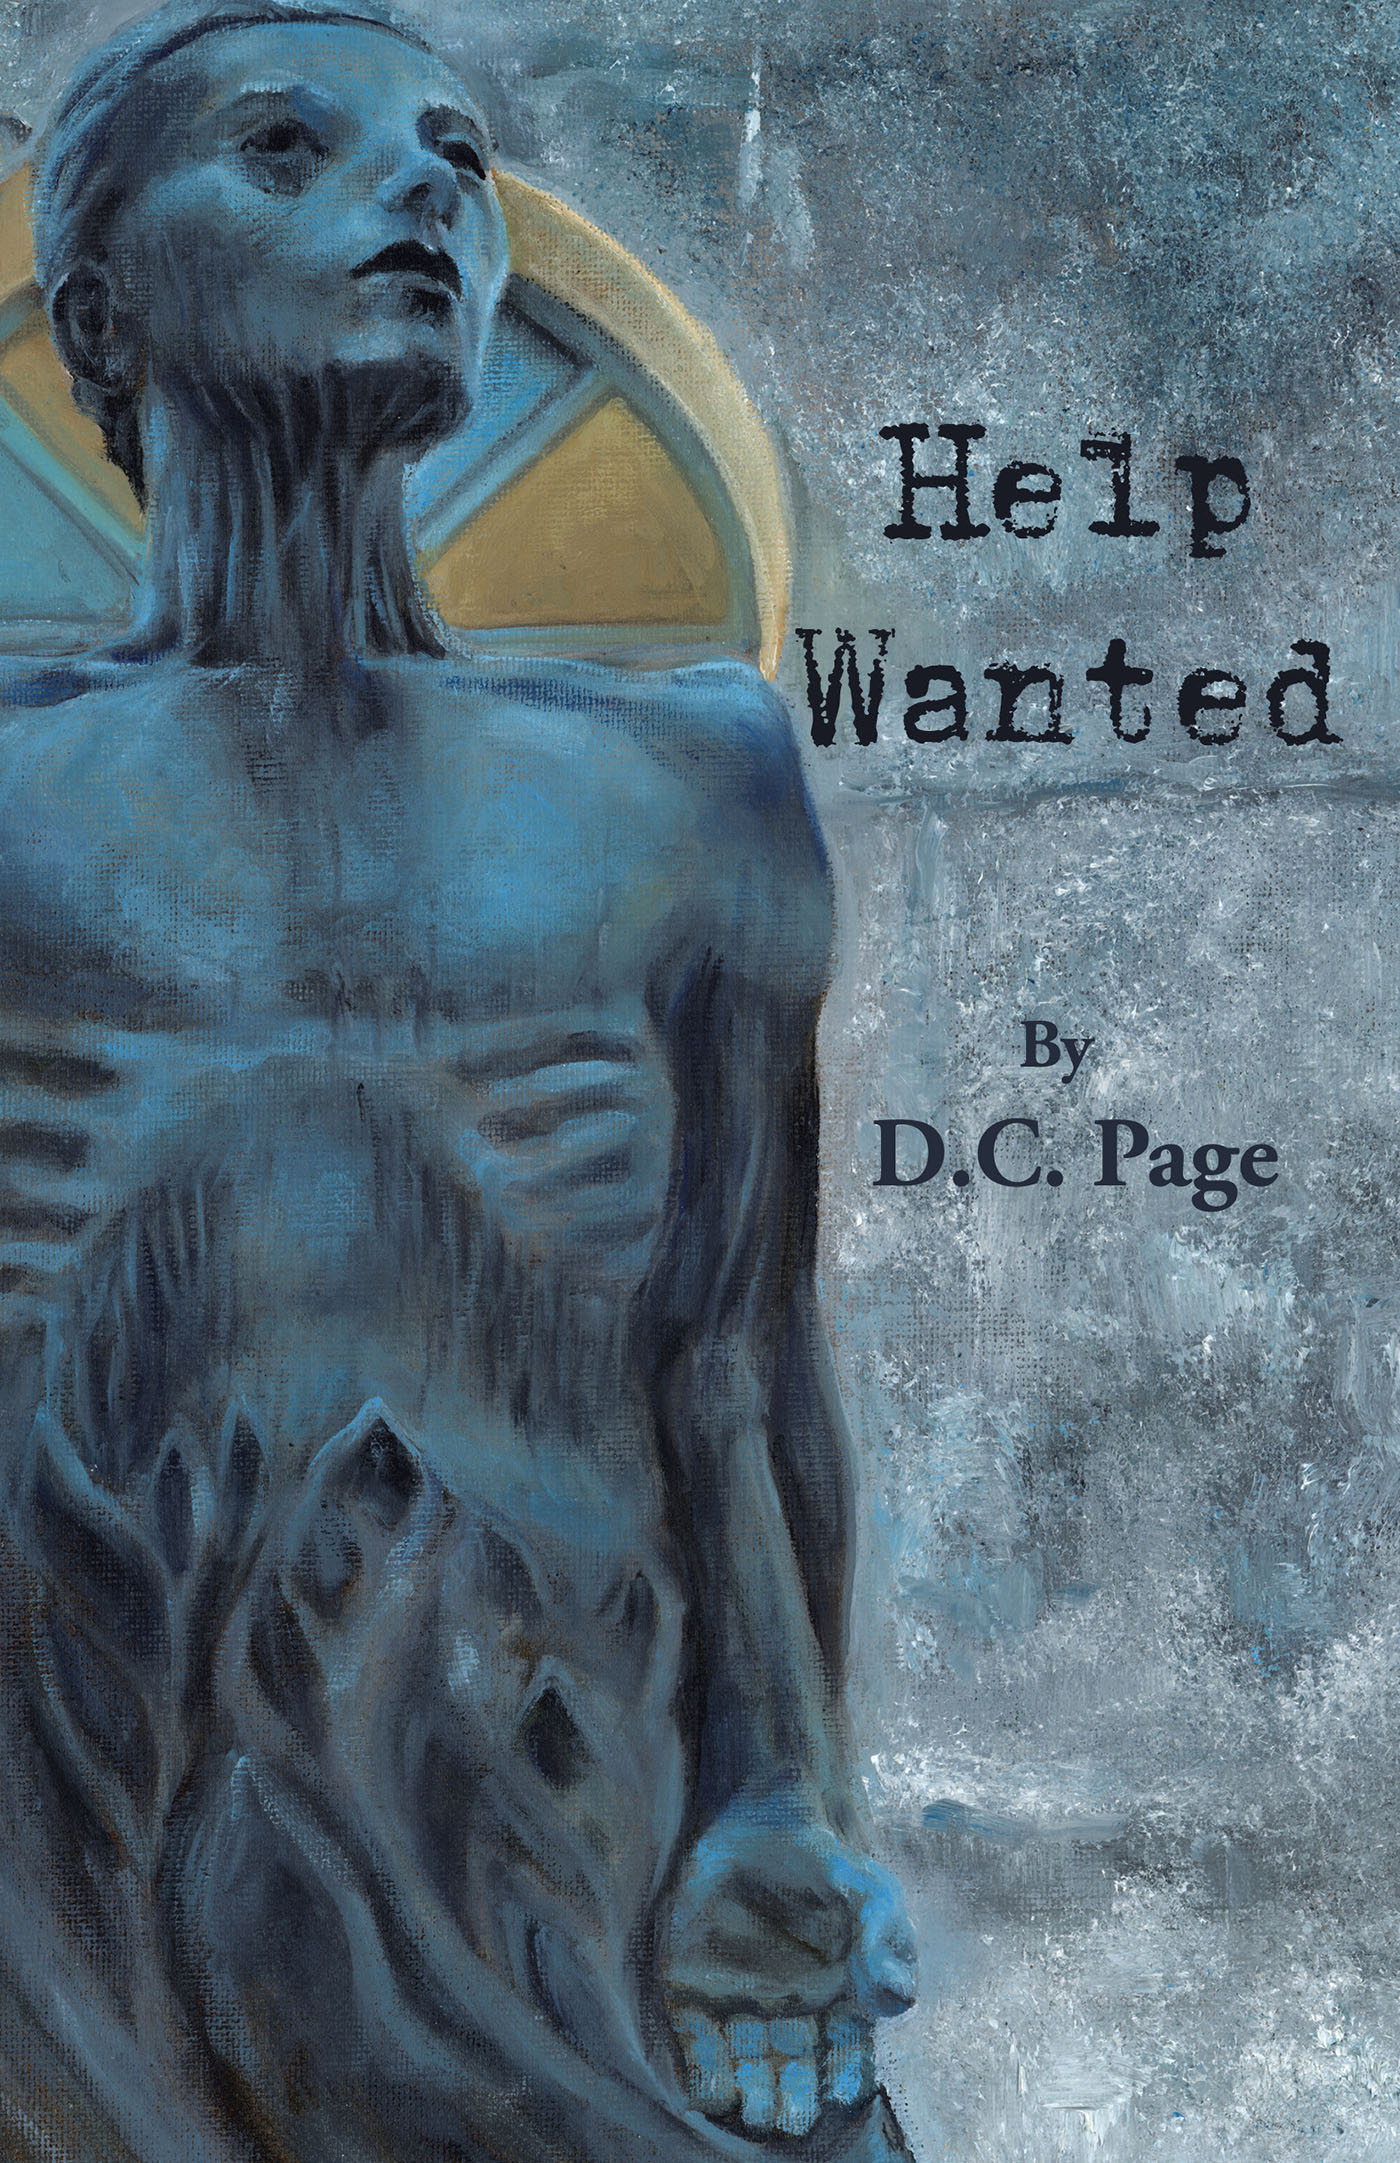 Author D. C. Page’s New Book, "Help Wanted," is an Enthralling Tale That Explores One Man’s Journey to Leave Behind a Criminal Underworld Before It’s Too Late